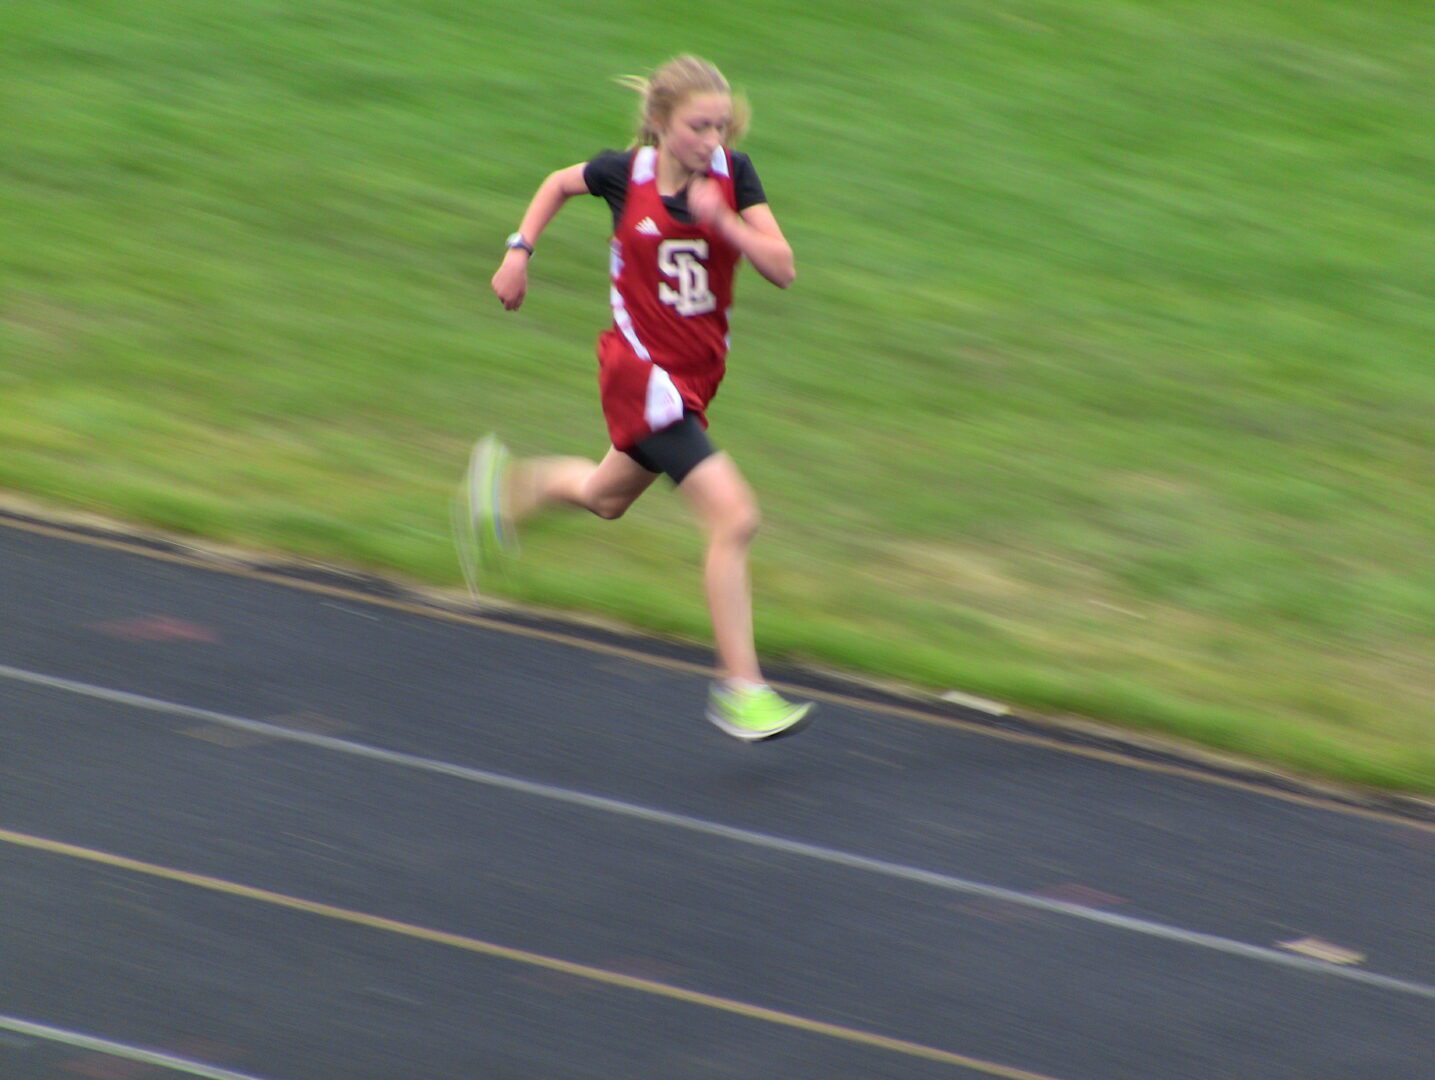 Spring Lake girls earn first place in Lakes 8 conference track meet [VIDEO]